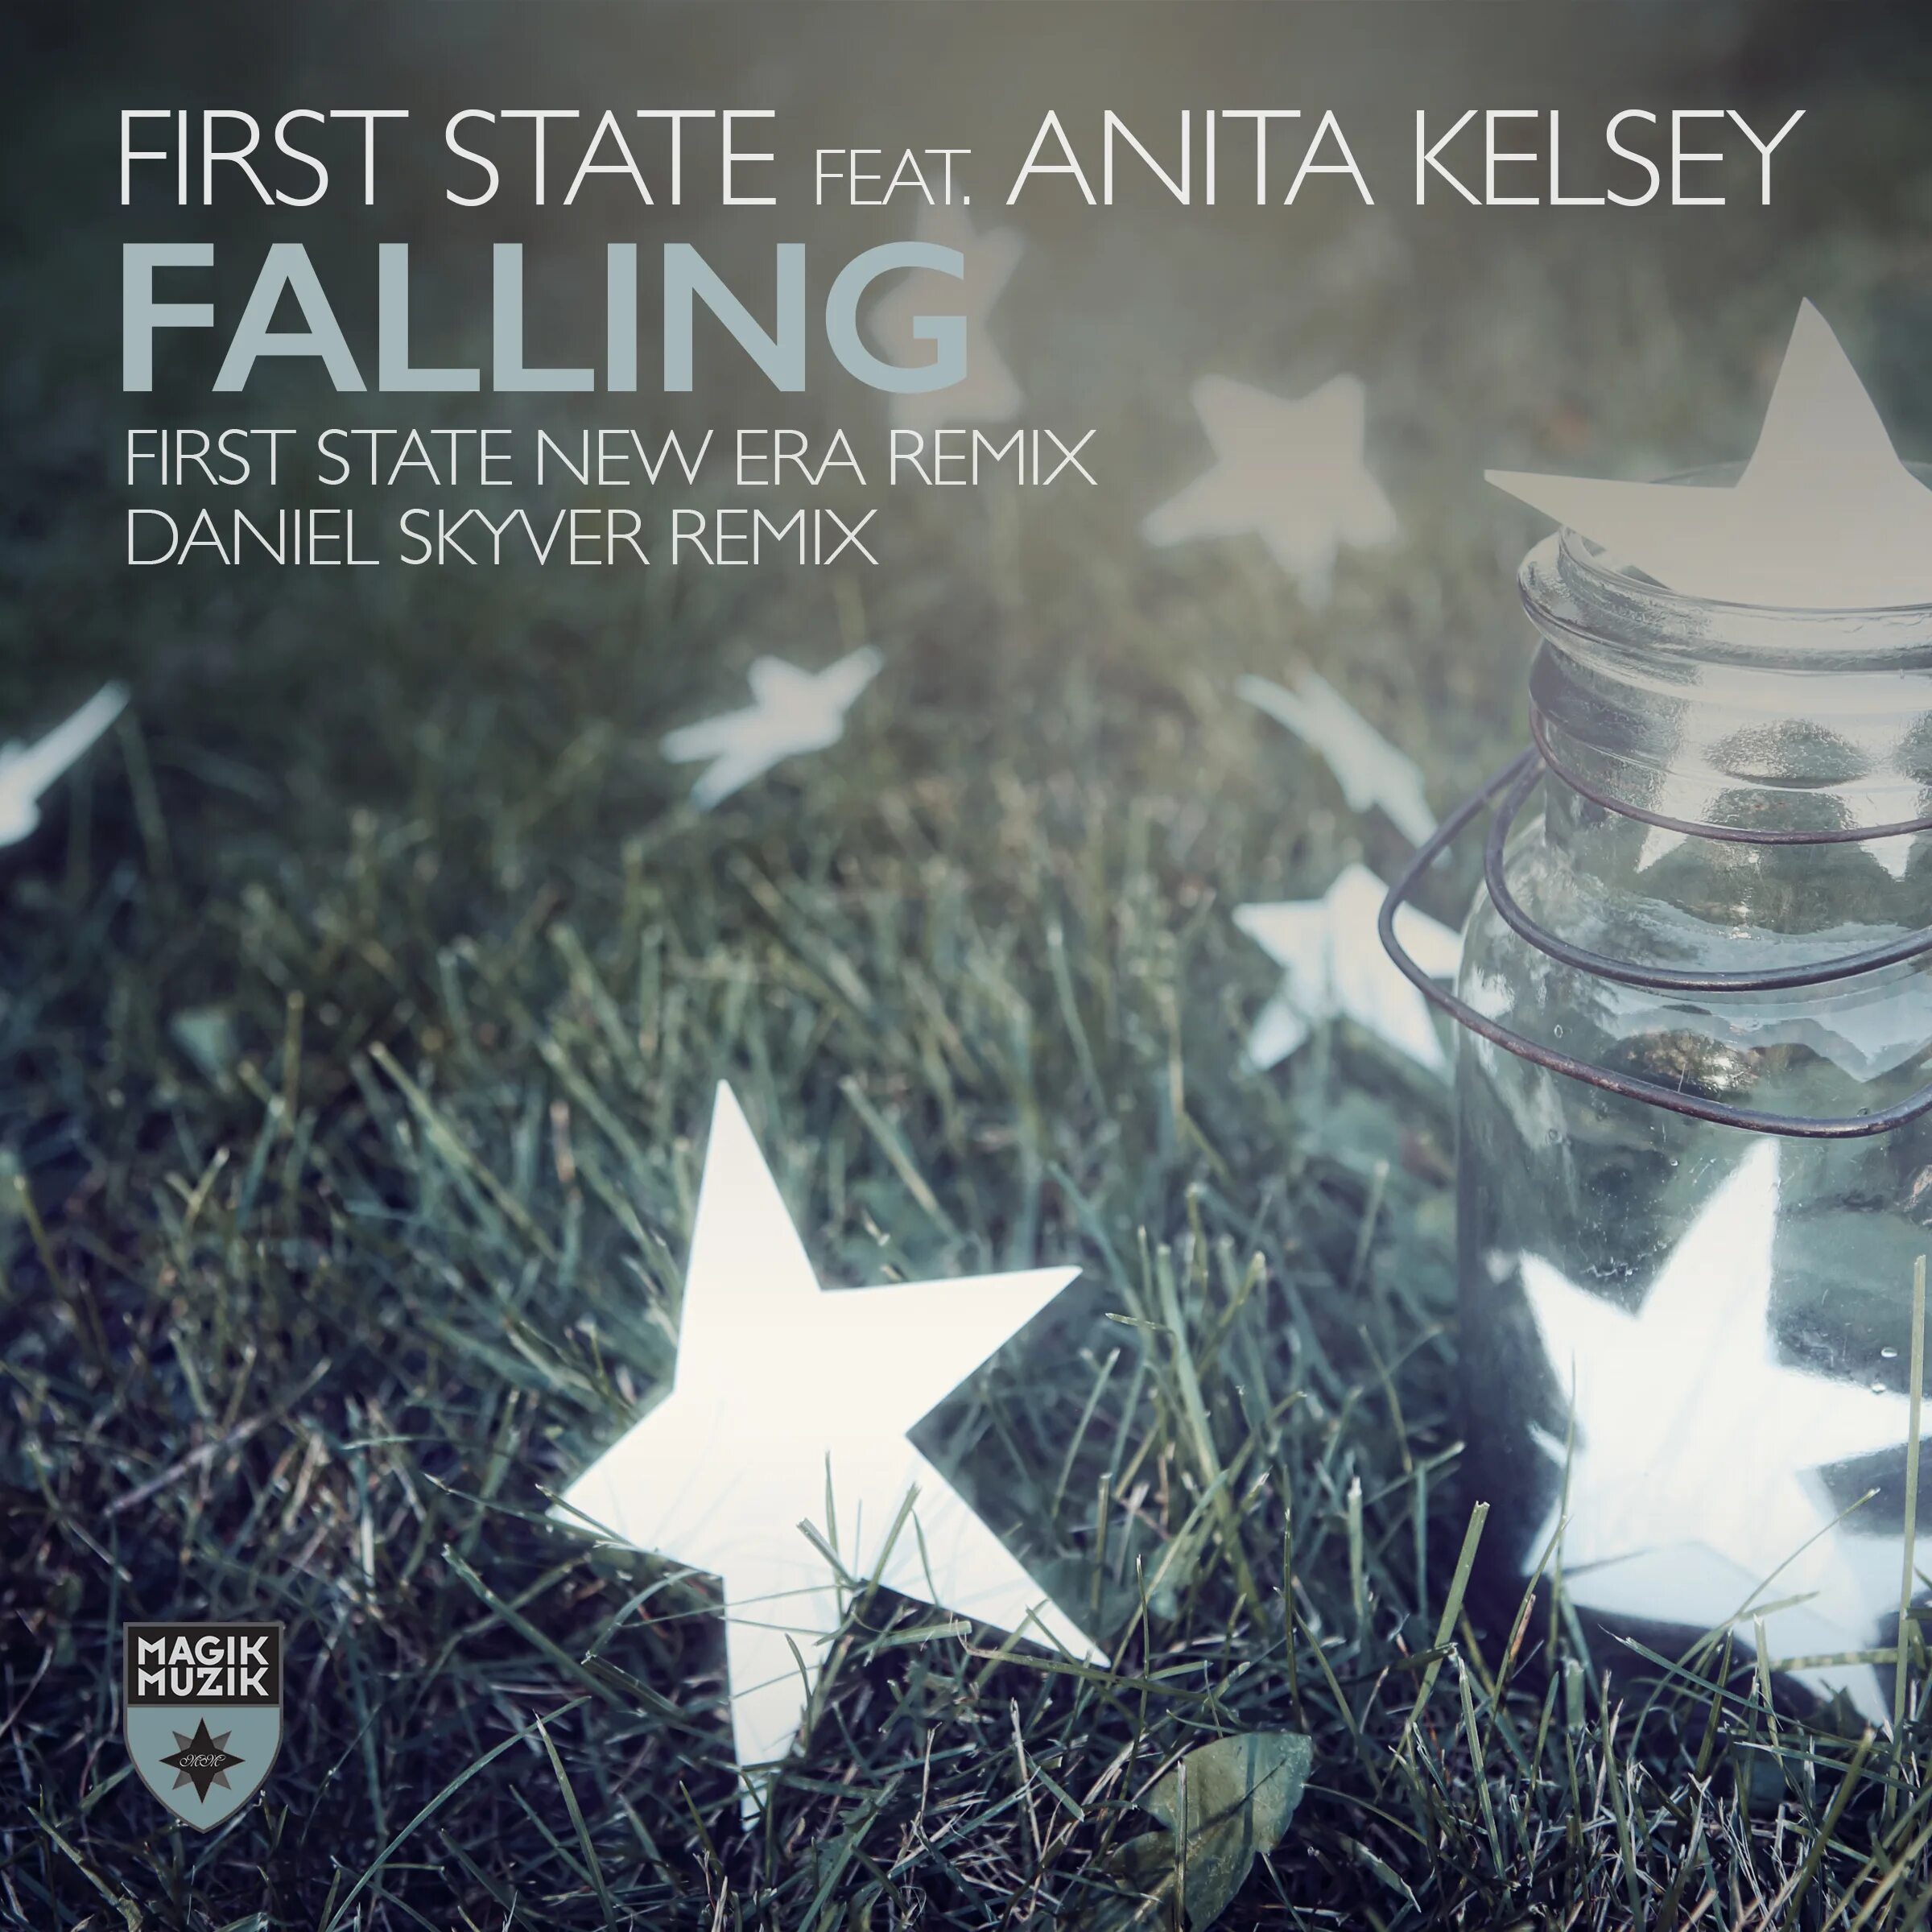 Fallen flac. First State feat. Anita Kelsey - Falling. First State feat. Anita Kelsey - Falling (Daniel Skyver Remix). First State, Anita Kelsey Falling - Craig Connelly Remix. Falling (feat. Blackbear) арт.